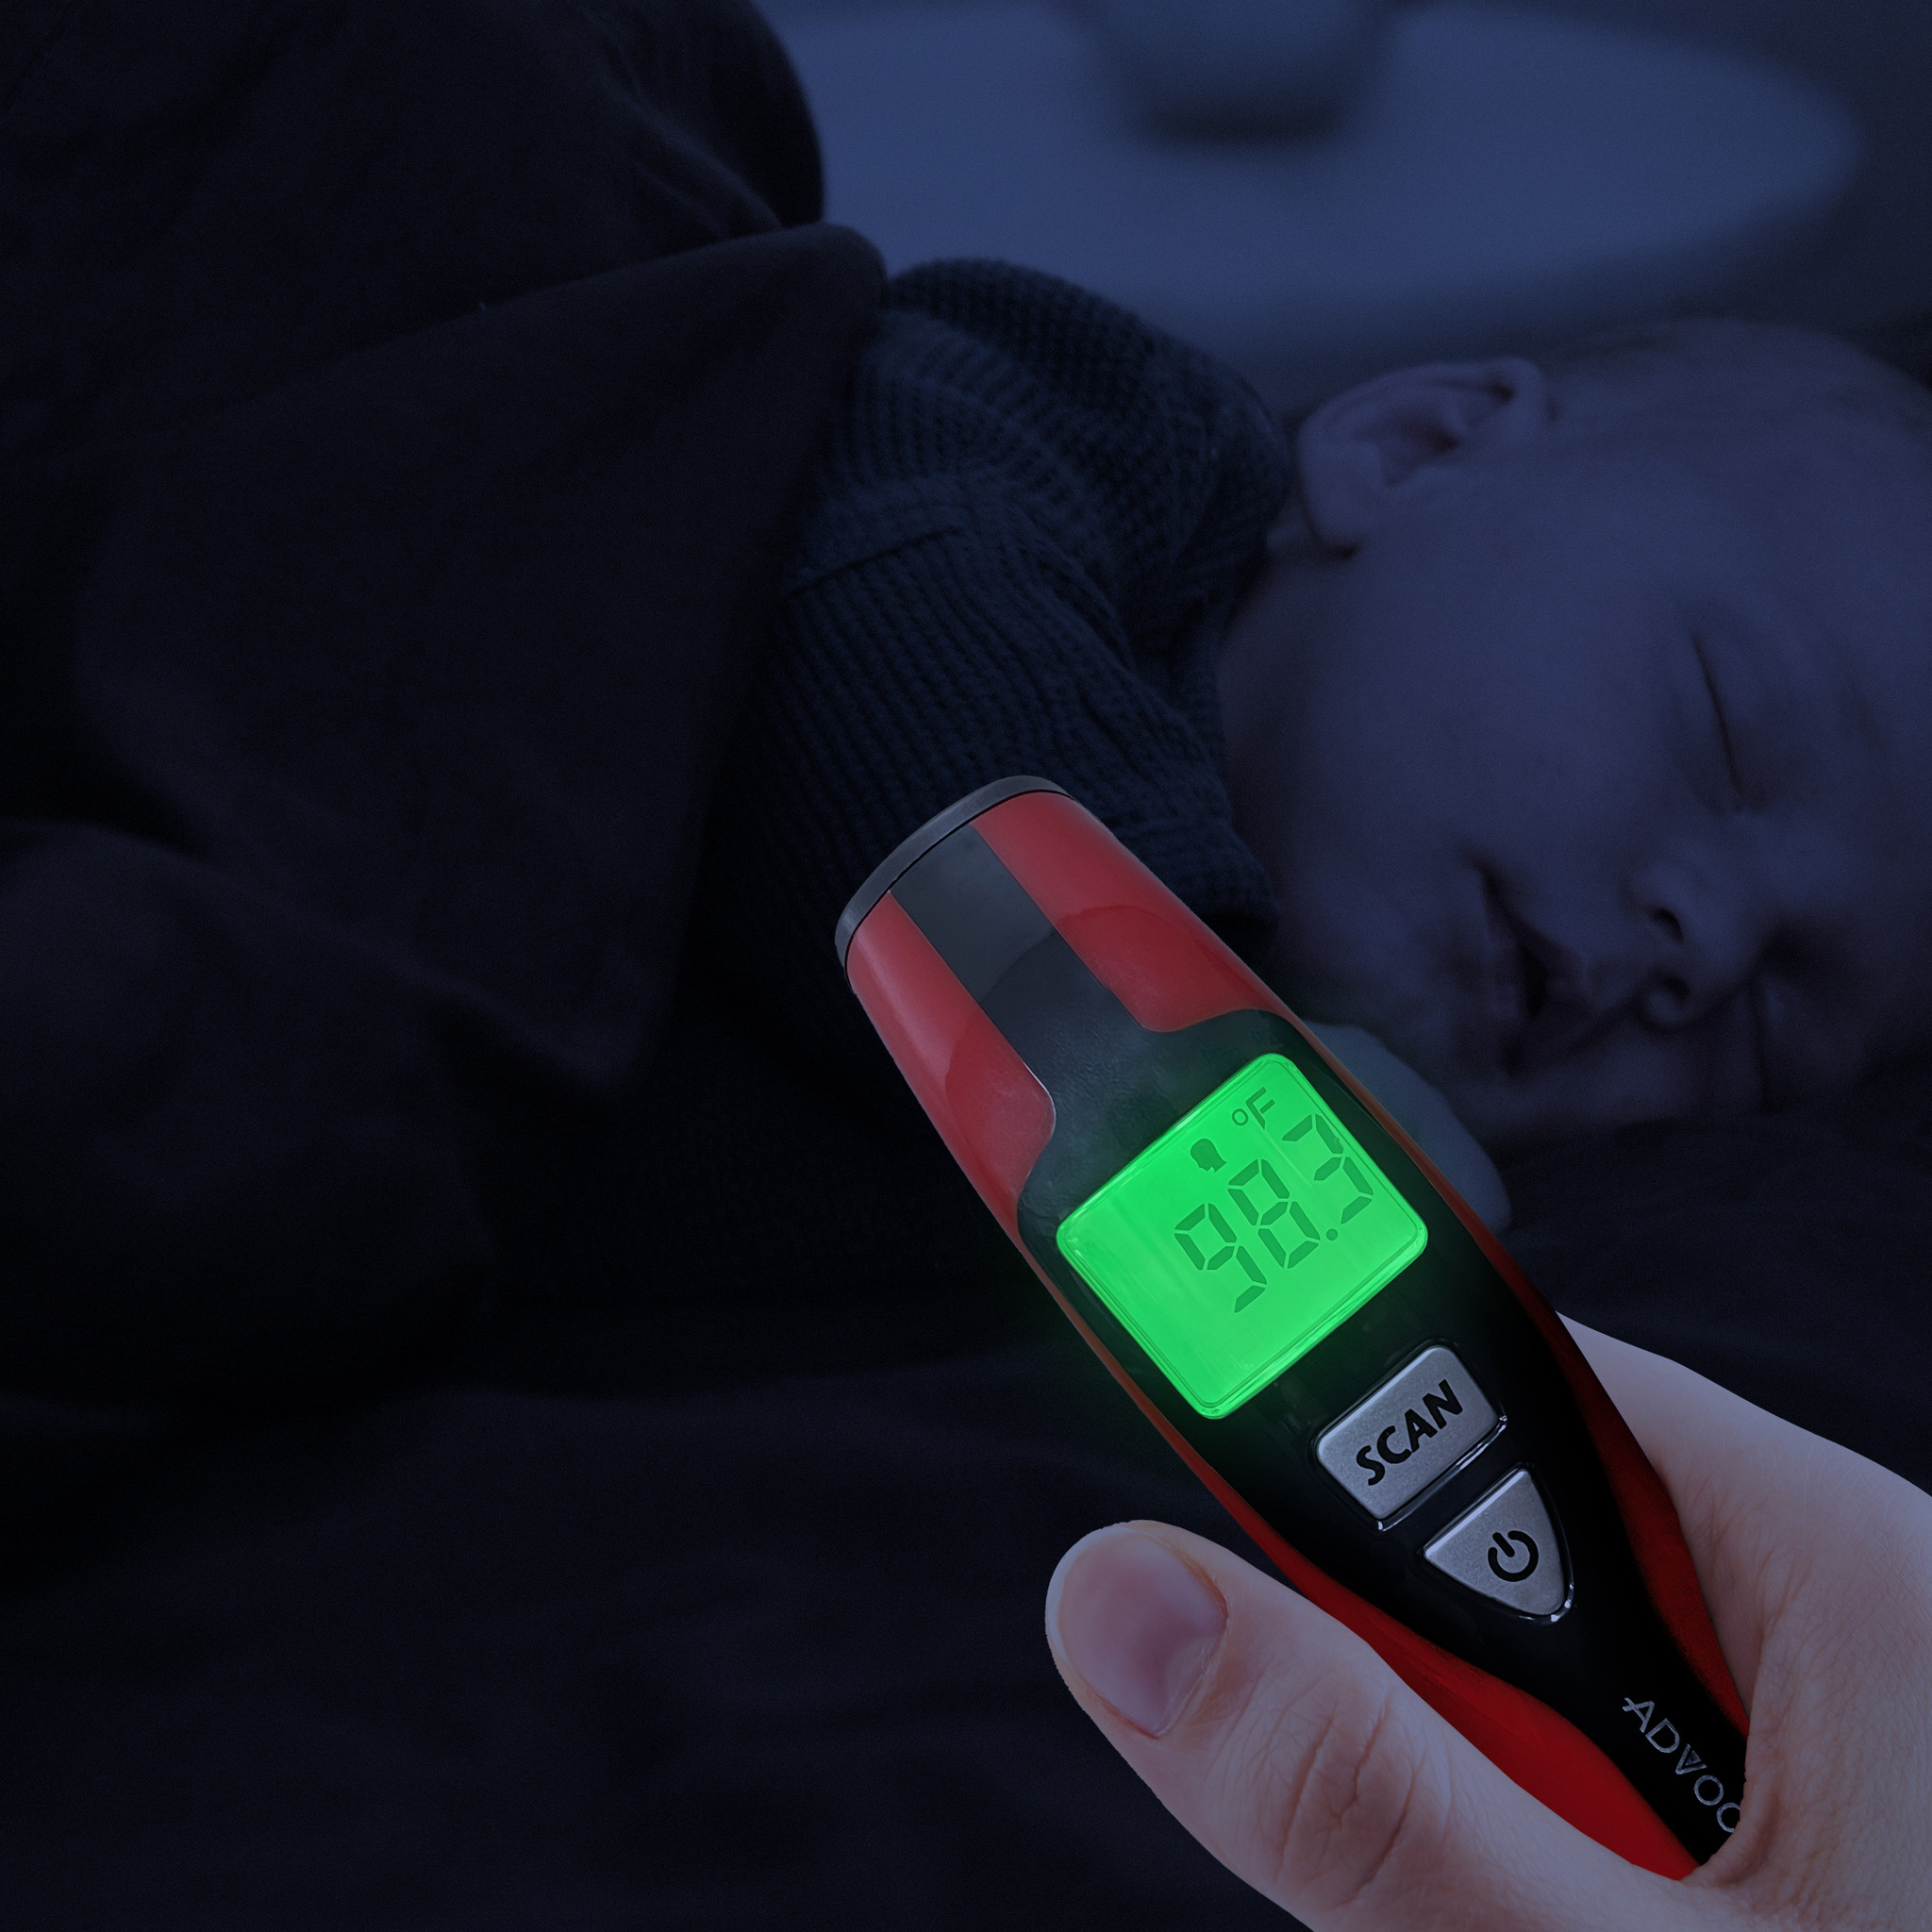 https://cdn11.bigcommerce.com/s-4e91b89tn/images/stencil/2048x2048/products/218/674/baby_thermometer__45140.1623262230.jpg?c=2